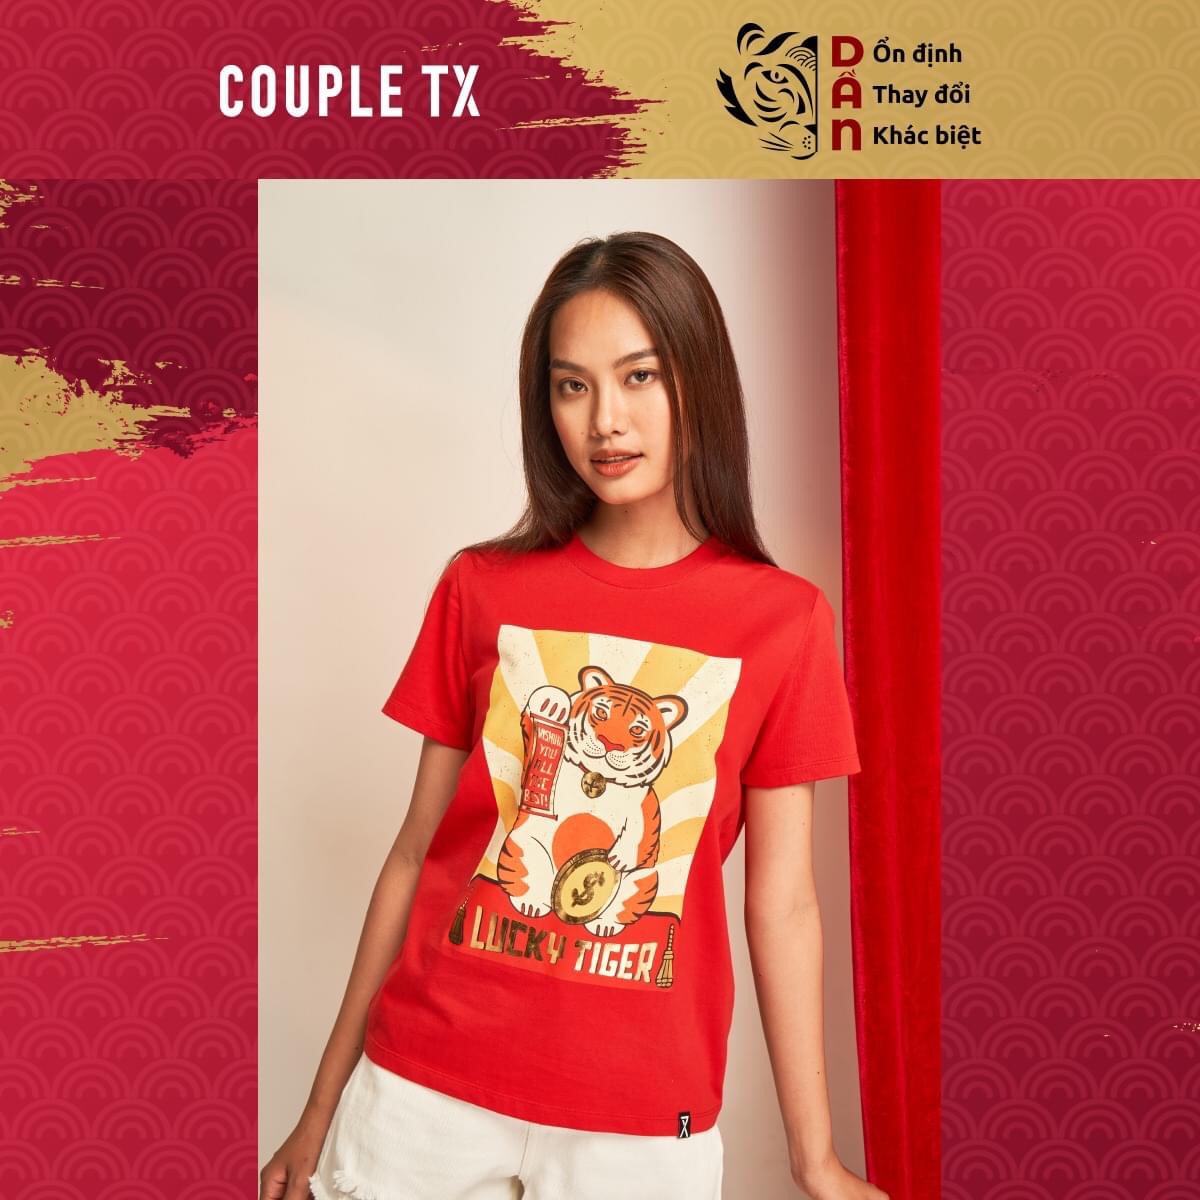 COUPLE TX – NEW YEARS IN STYLISH WITH COUPLE TX